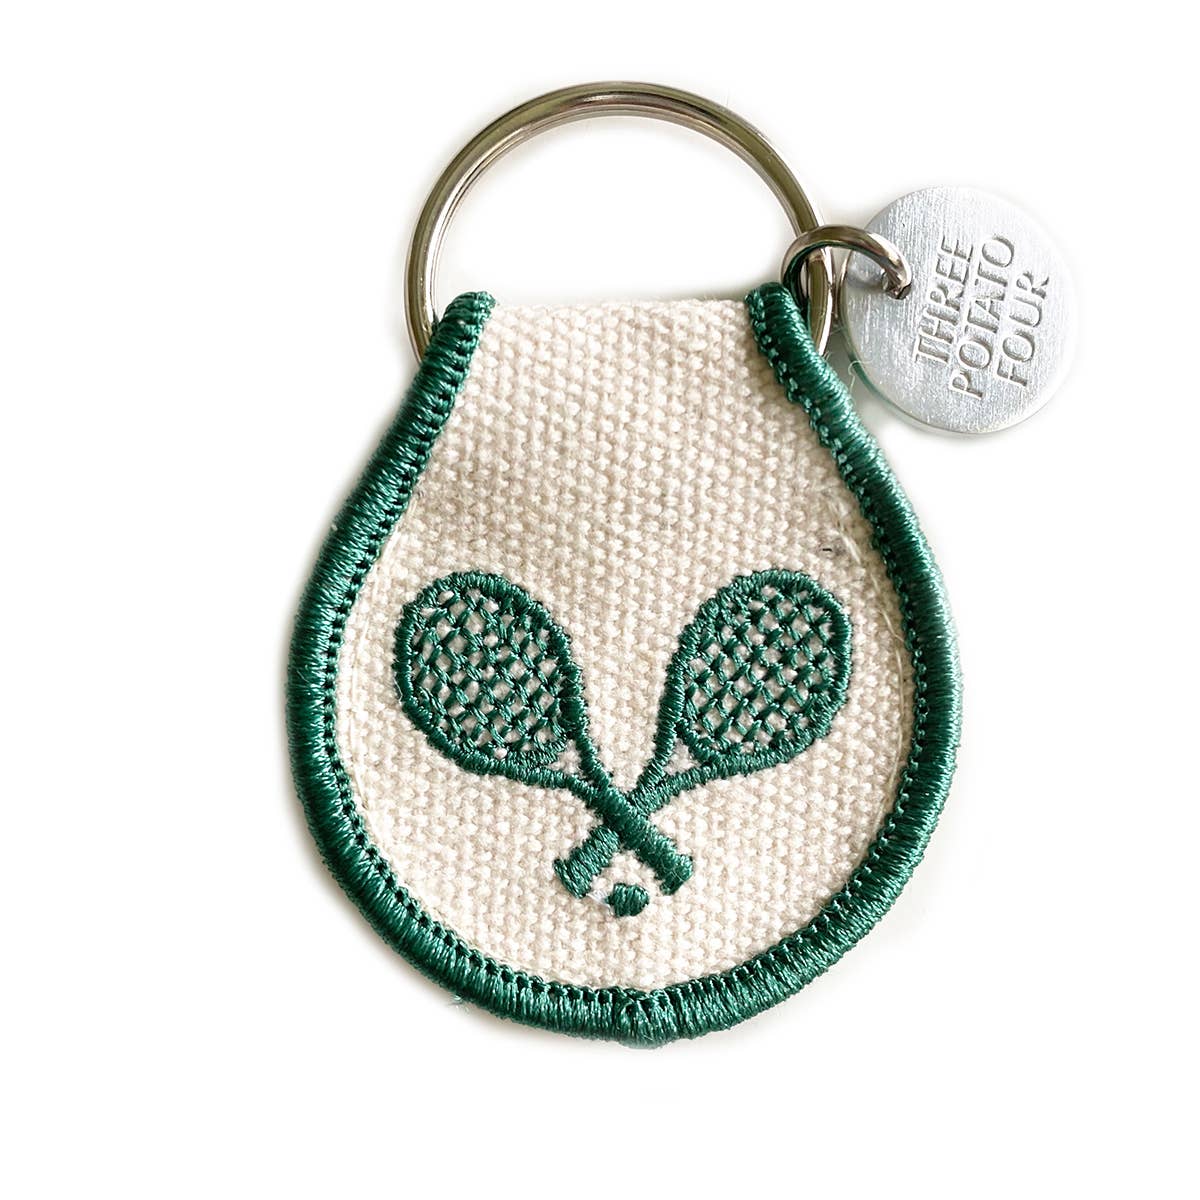 A Patch Keychain - Tennis Partners keychain with a tennis racket on it by Three Potato Four.